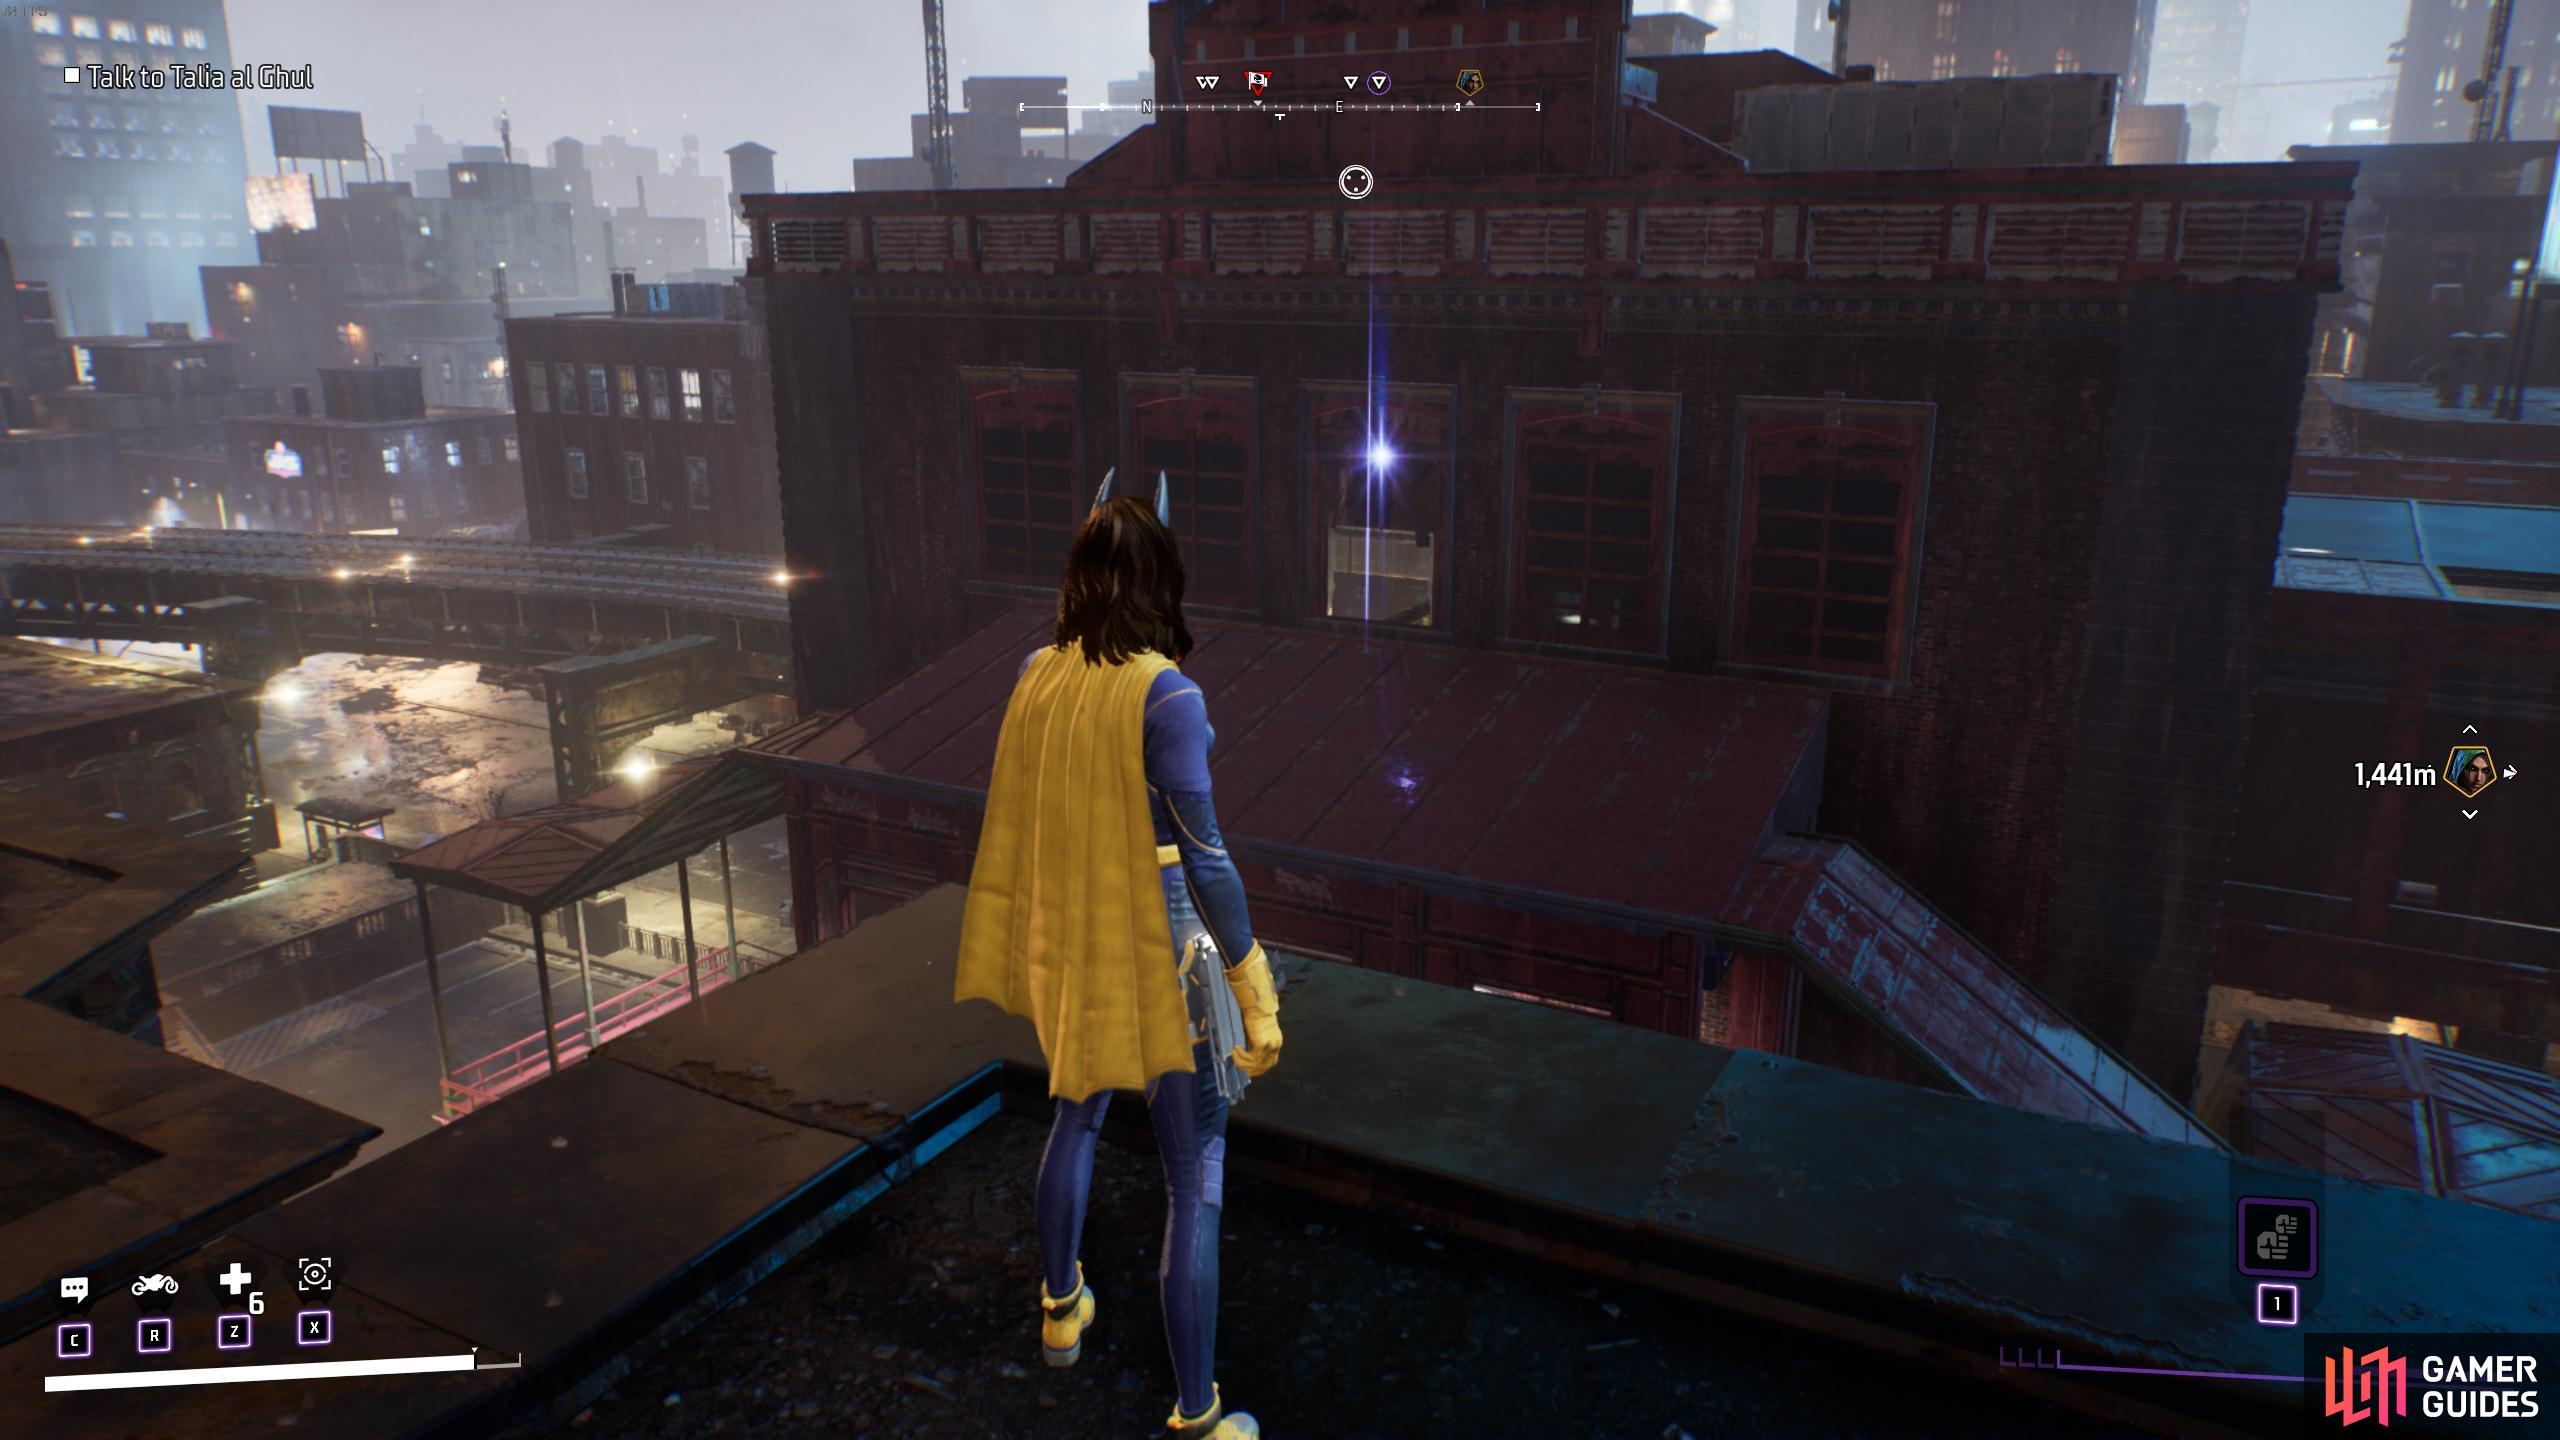 This Batarang can be found just above the broken window. You’ll need to grapple above then drop down to obtain it.